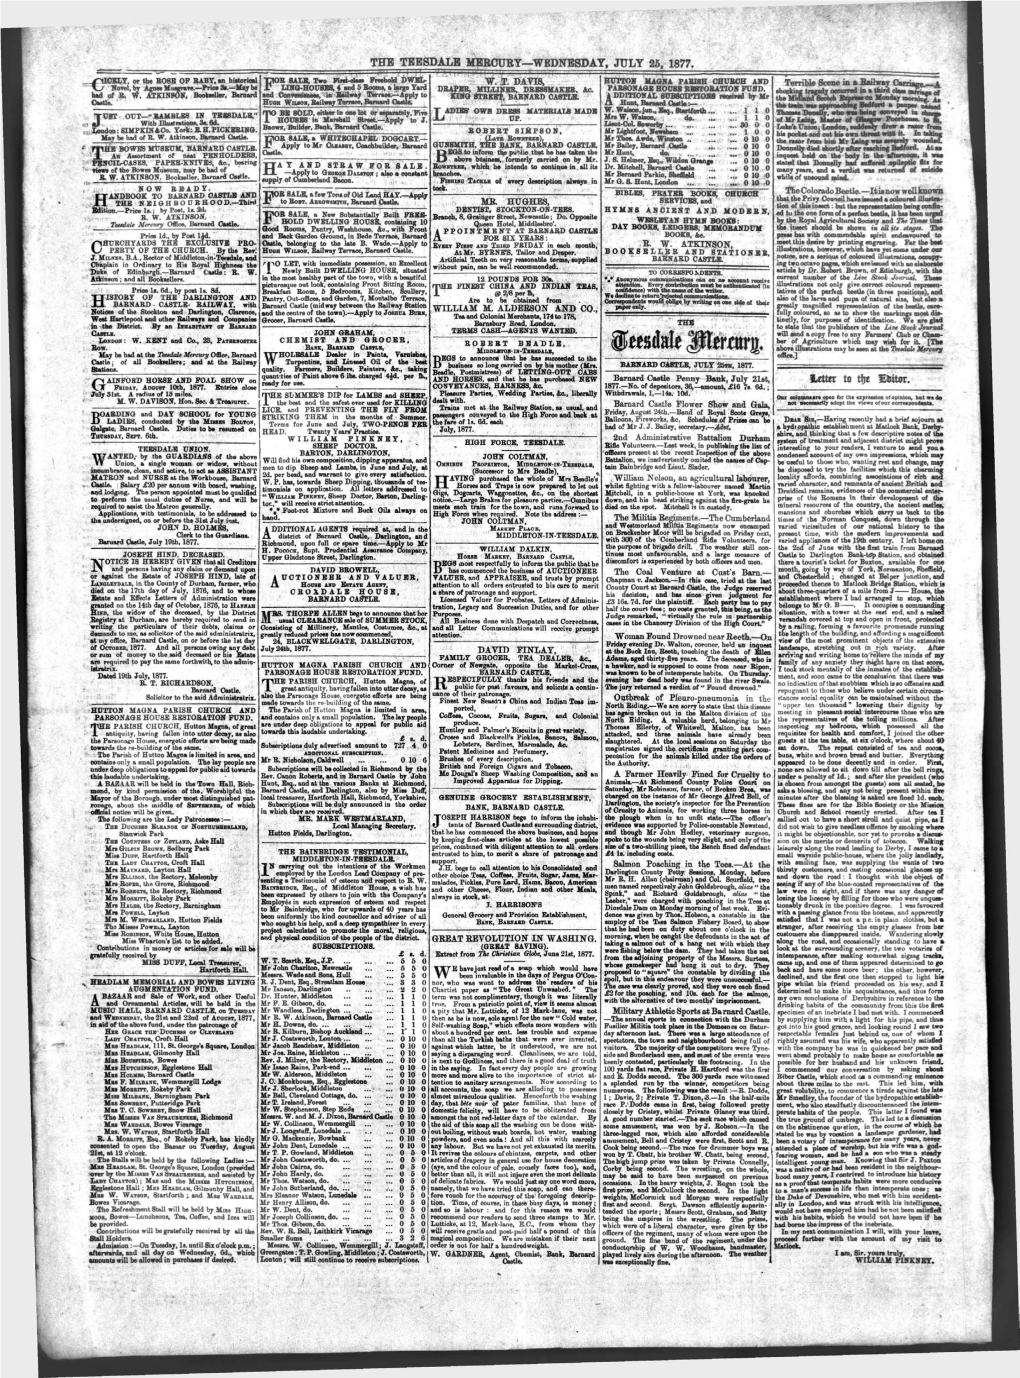 The Tbesdale Mercury—Wednesday, July 25, 1877. . ^S